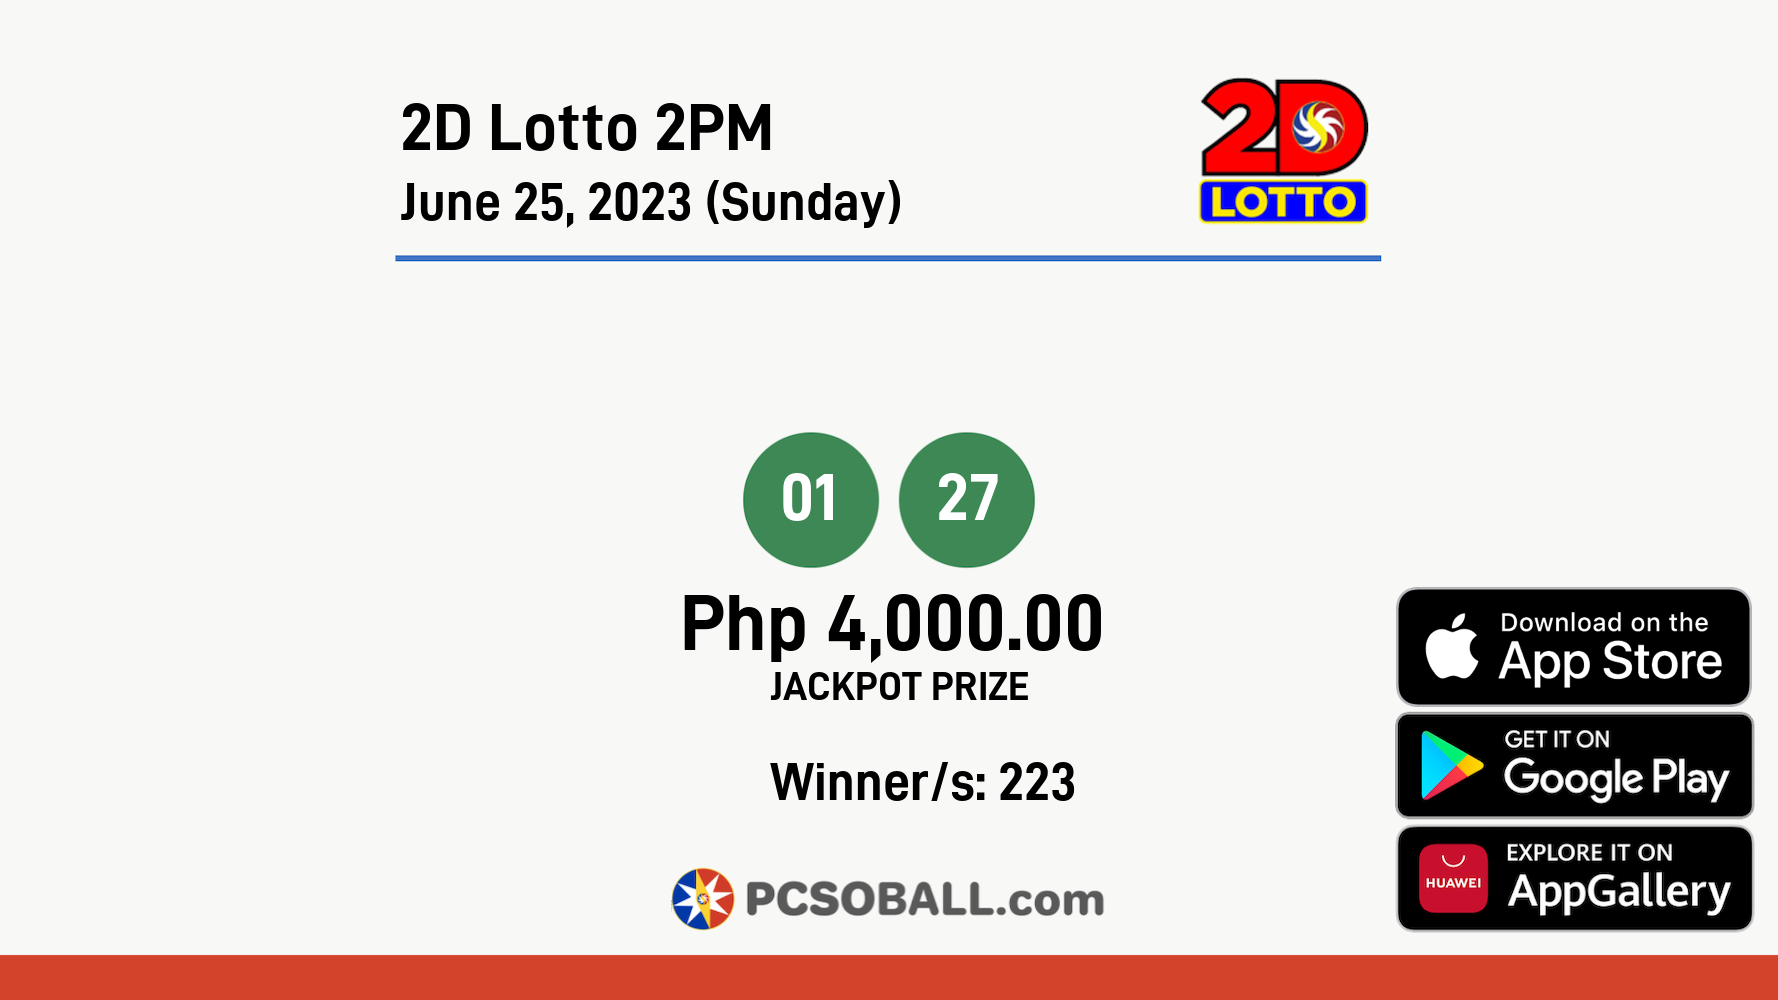 2D Lotto 2PM June 25, 2023 (Sunday) Result